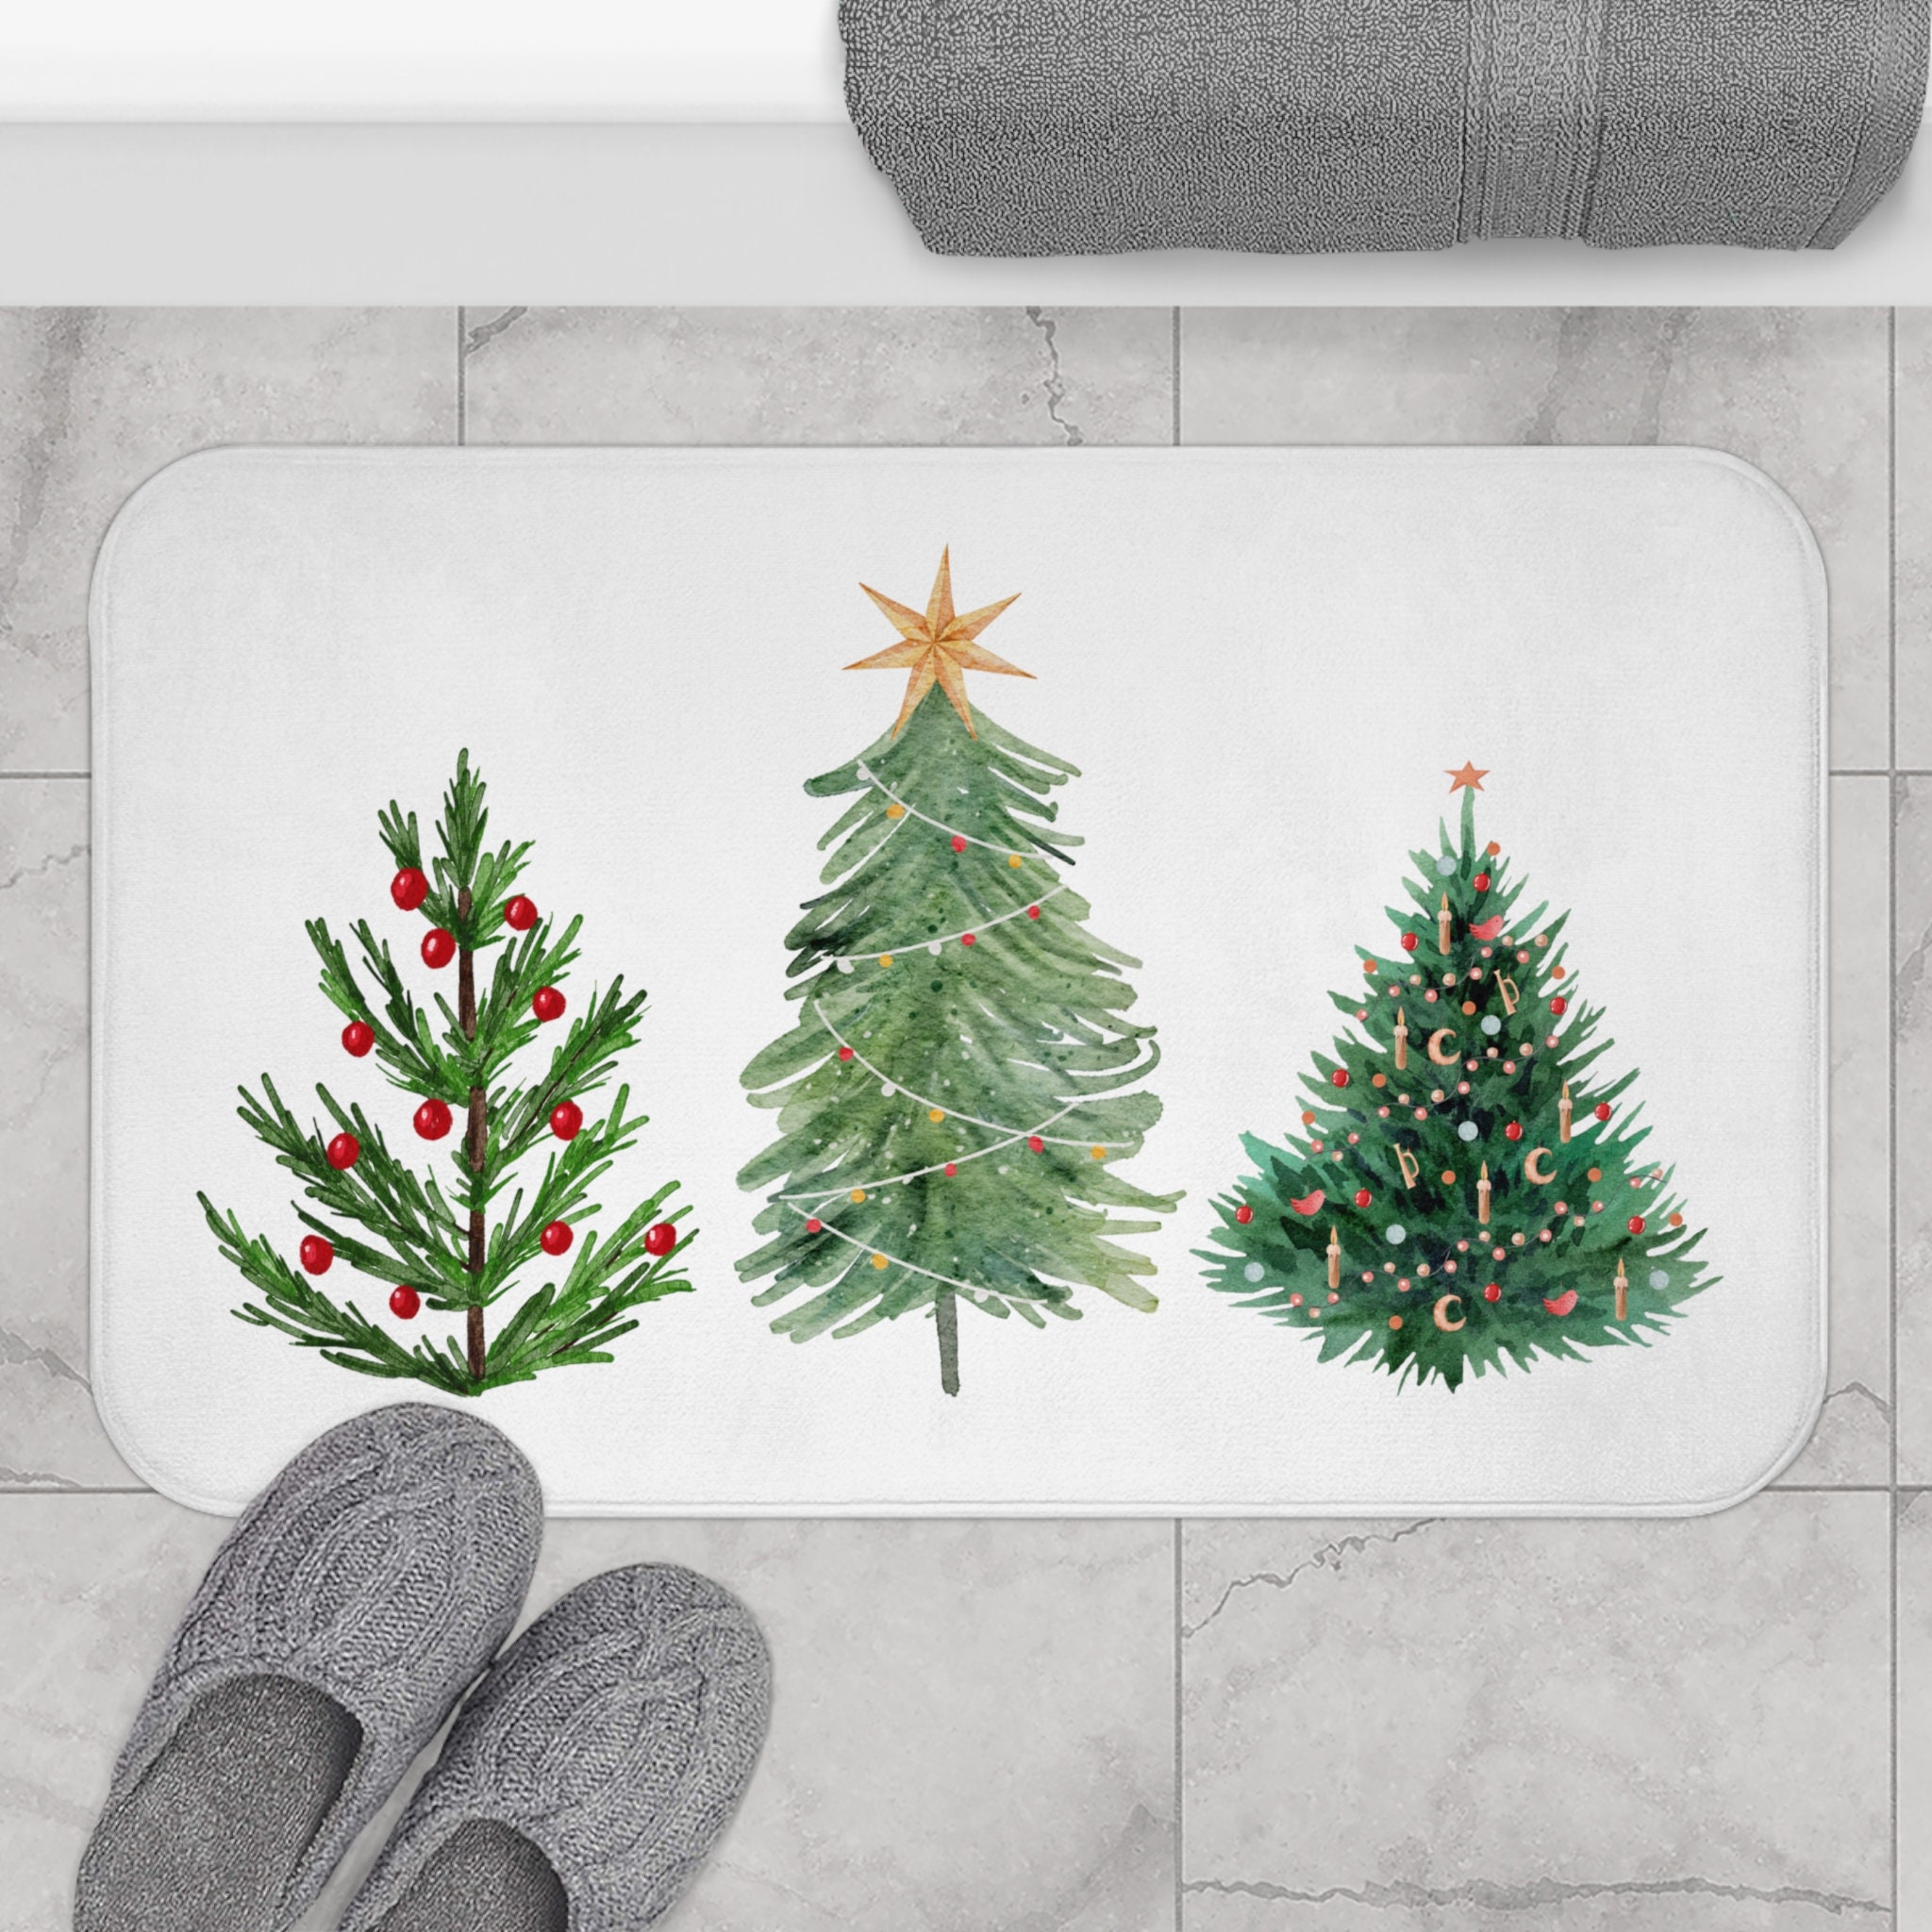  Christmas Dish Drying Mat for Kitchen Counter Gnome Xmas Tree  Snow Drying Pad Absorbent Drying Mats for Countertops Sinks Draining Racks  Snowflake Blue Reversible Drainer Xmas Decor 16x18 Inch: Home 